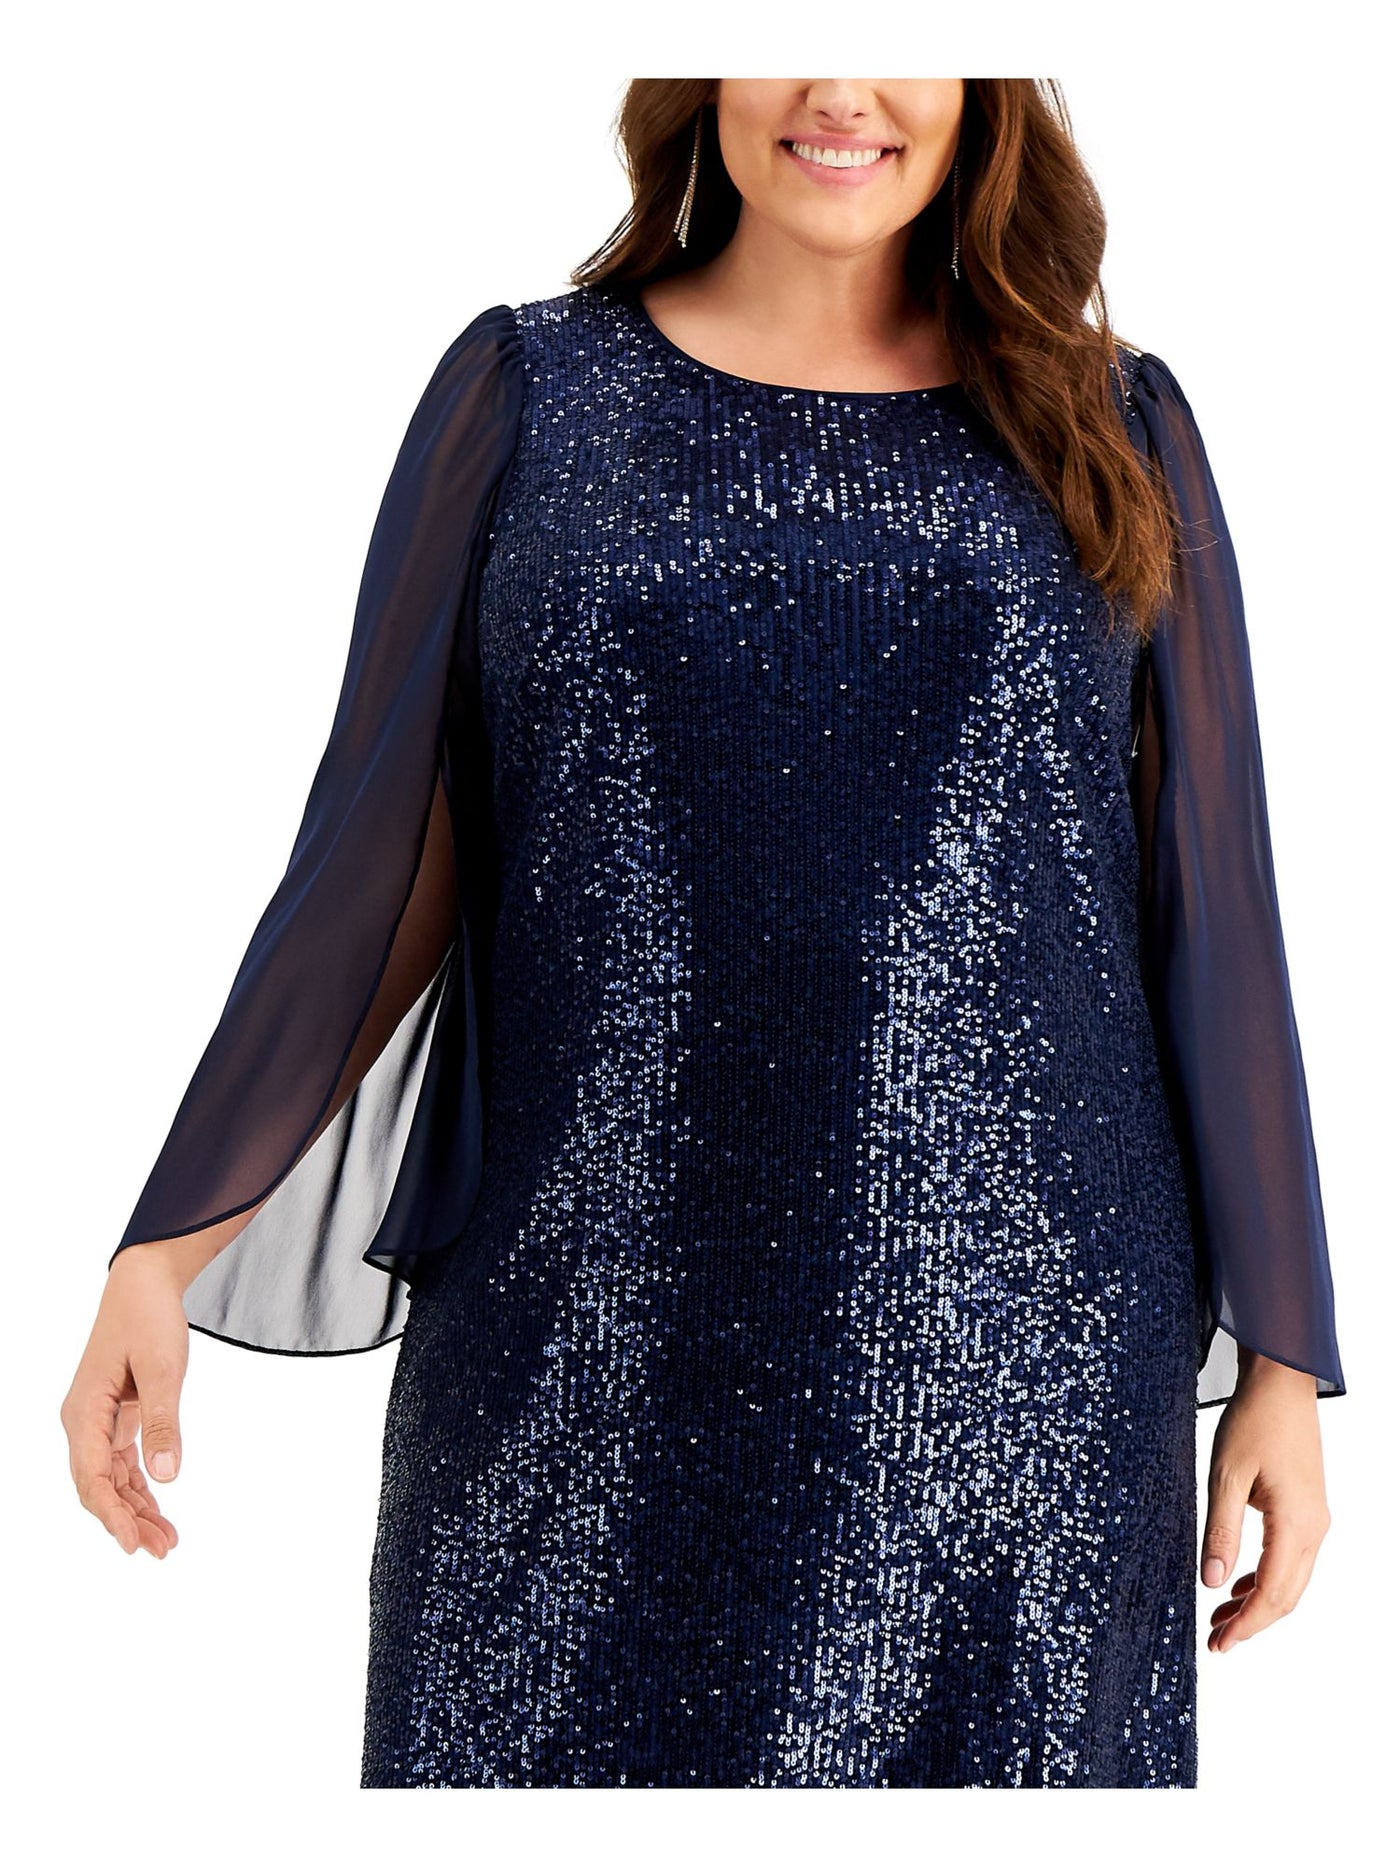 CONNECTED APPAREL Womens Navy Sequined Sheer Pull Over Lined Darted Long Sleeve Round Neck Knee Length Party Sheath Dress Plus 14W